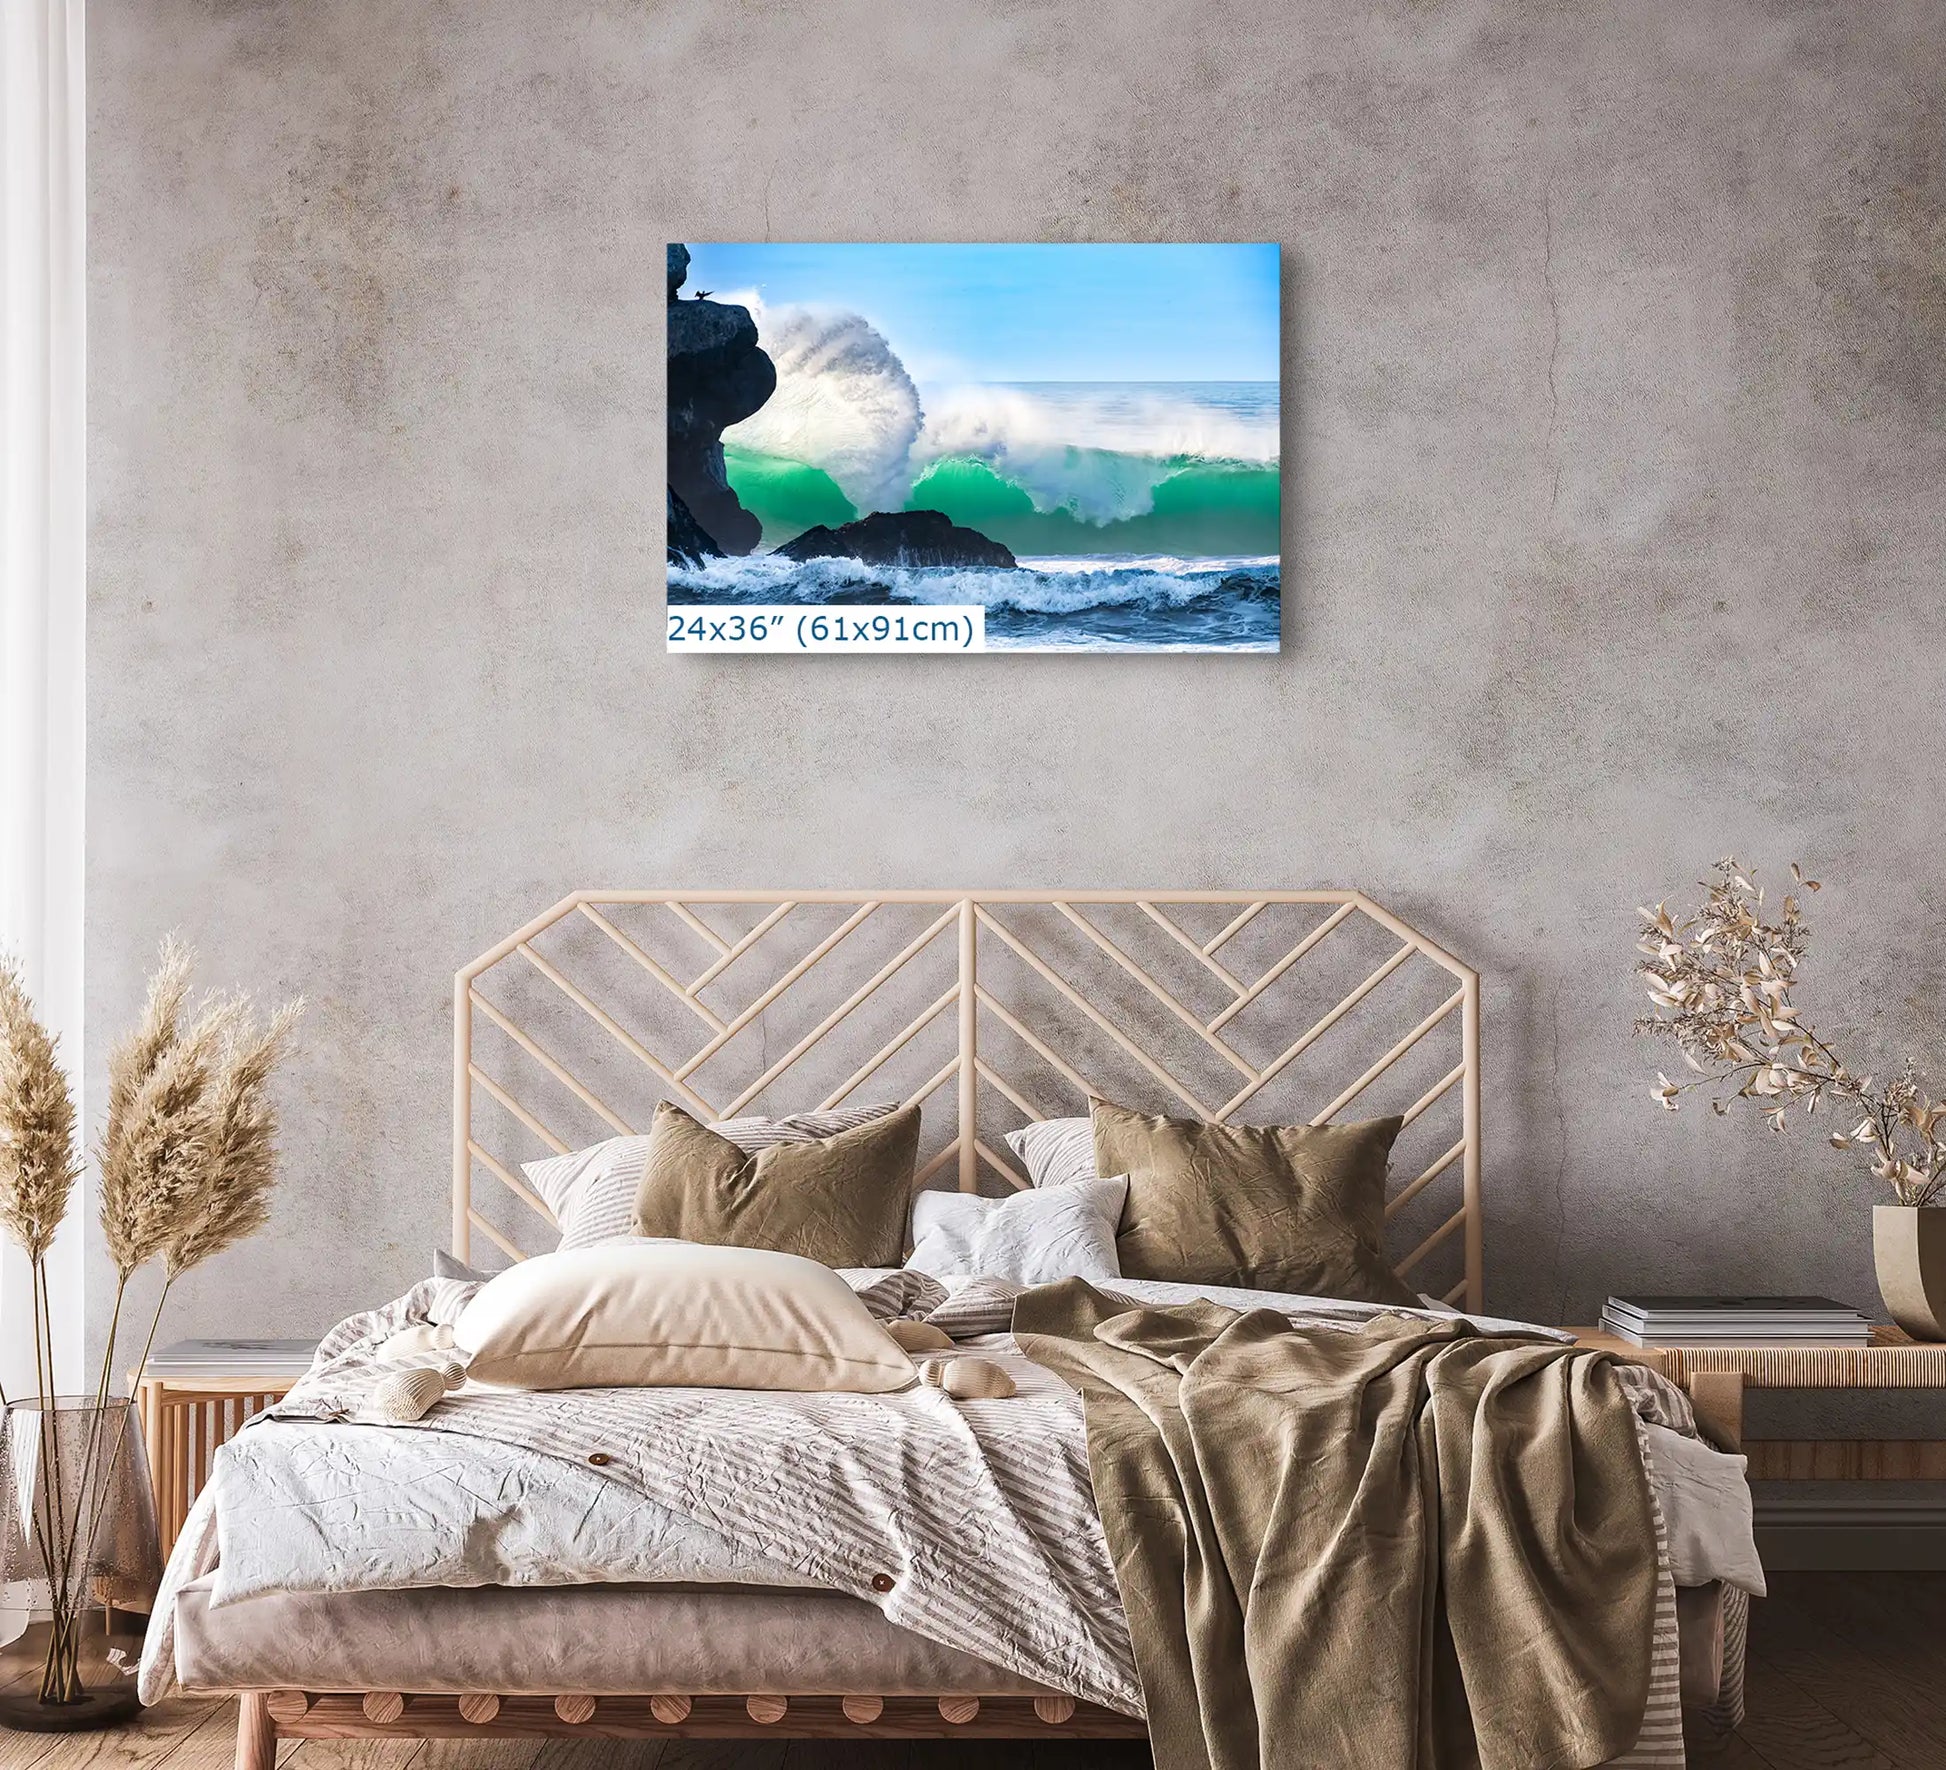 A 24"x36" canvas print of a majestic ocean wave near Morro Rock, positioned above the bed as a striking bedroom focal point.